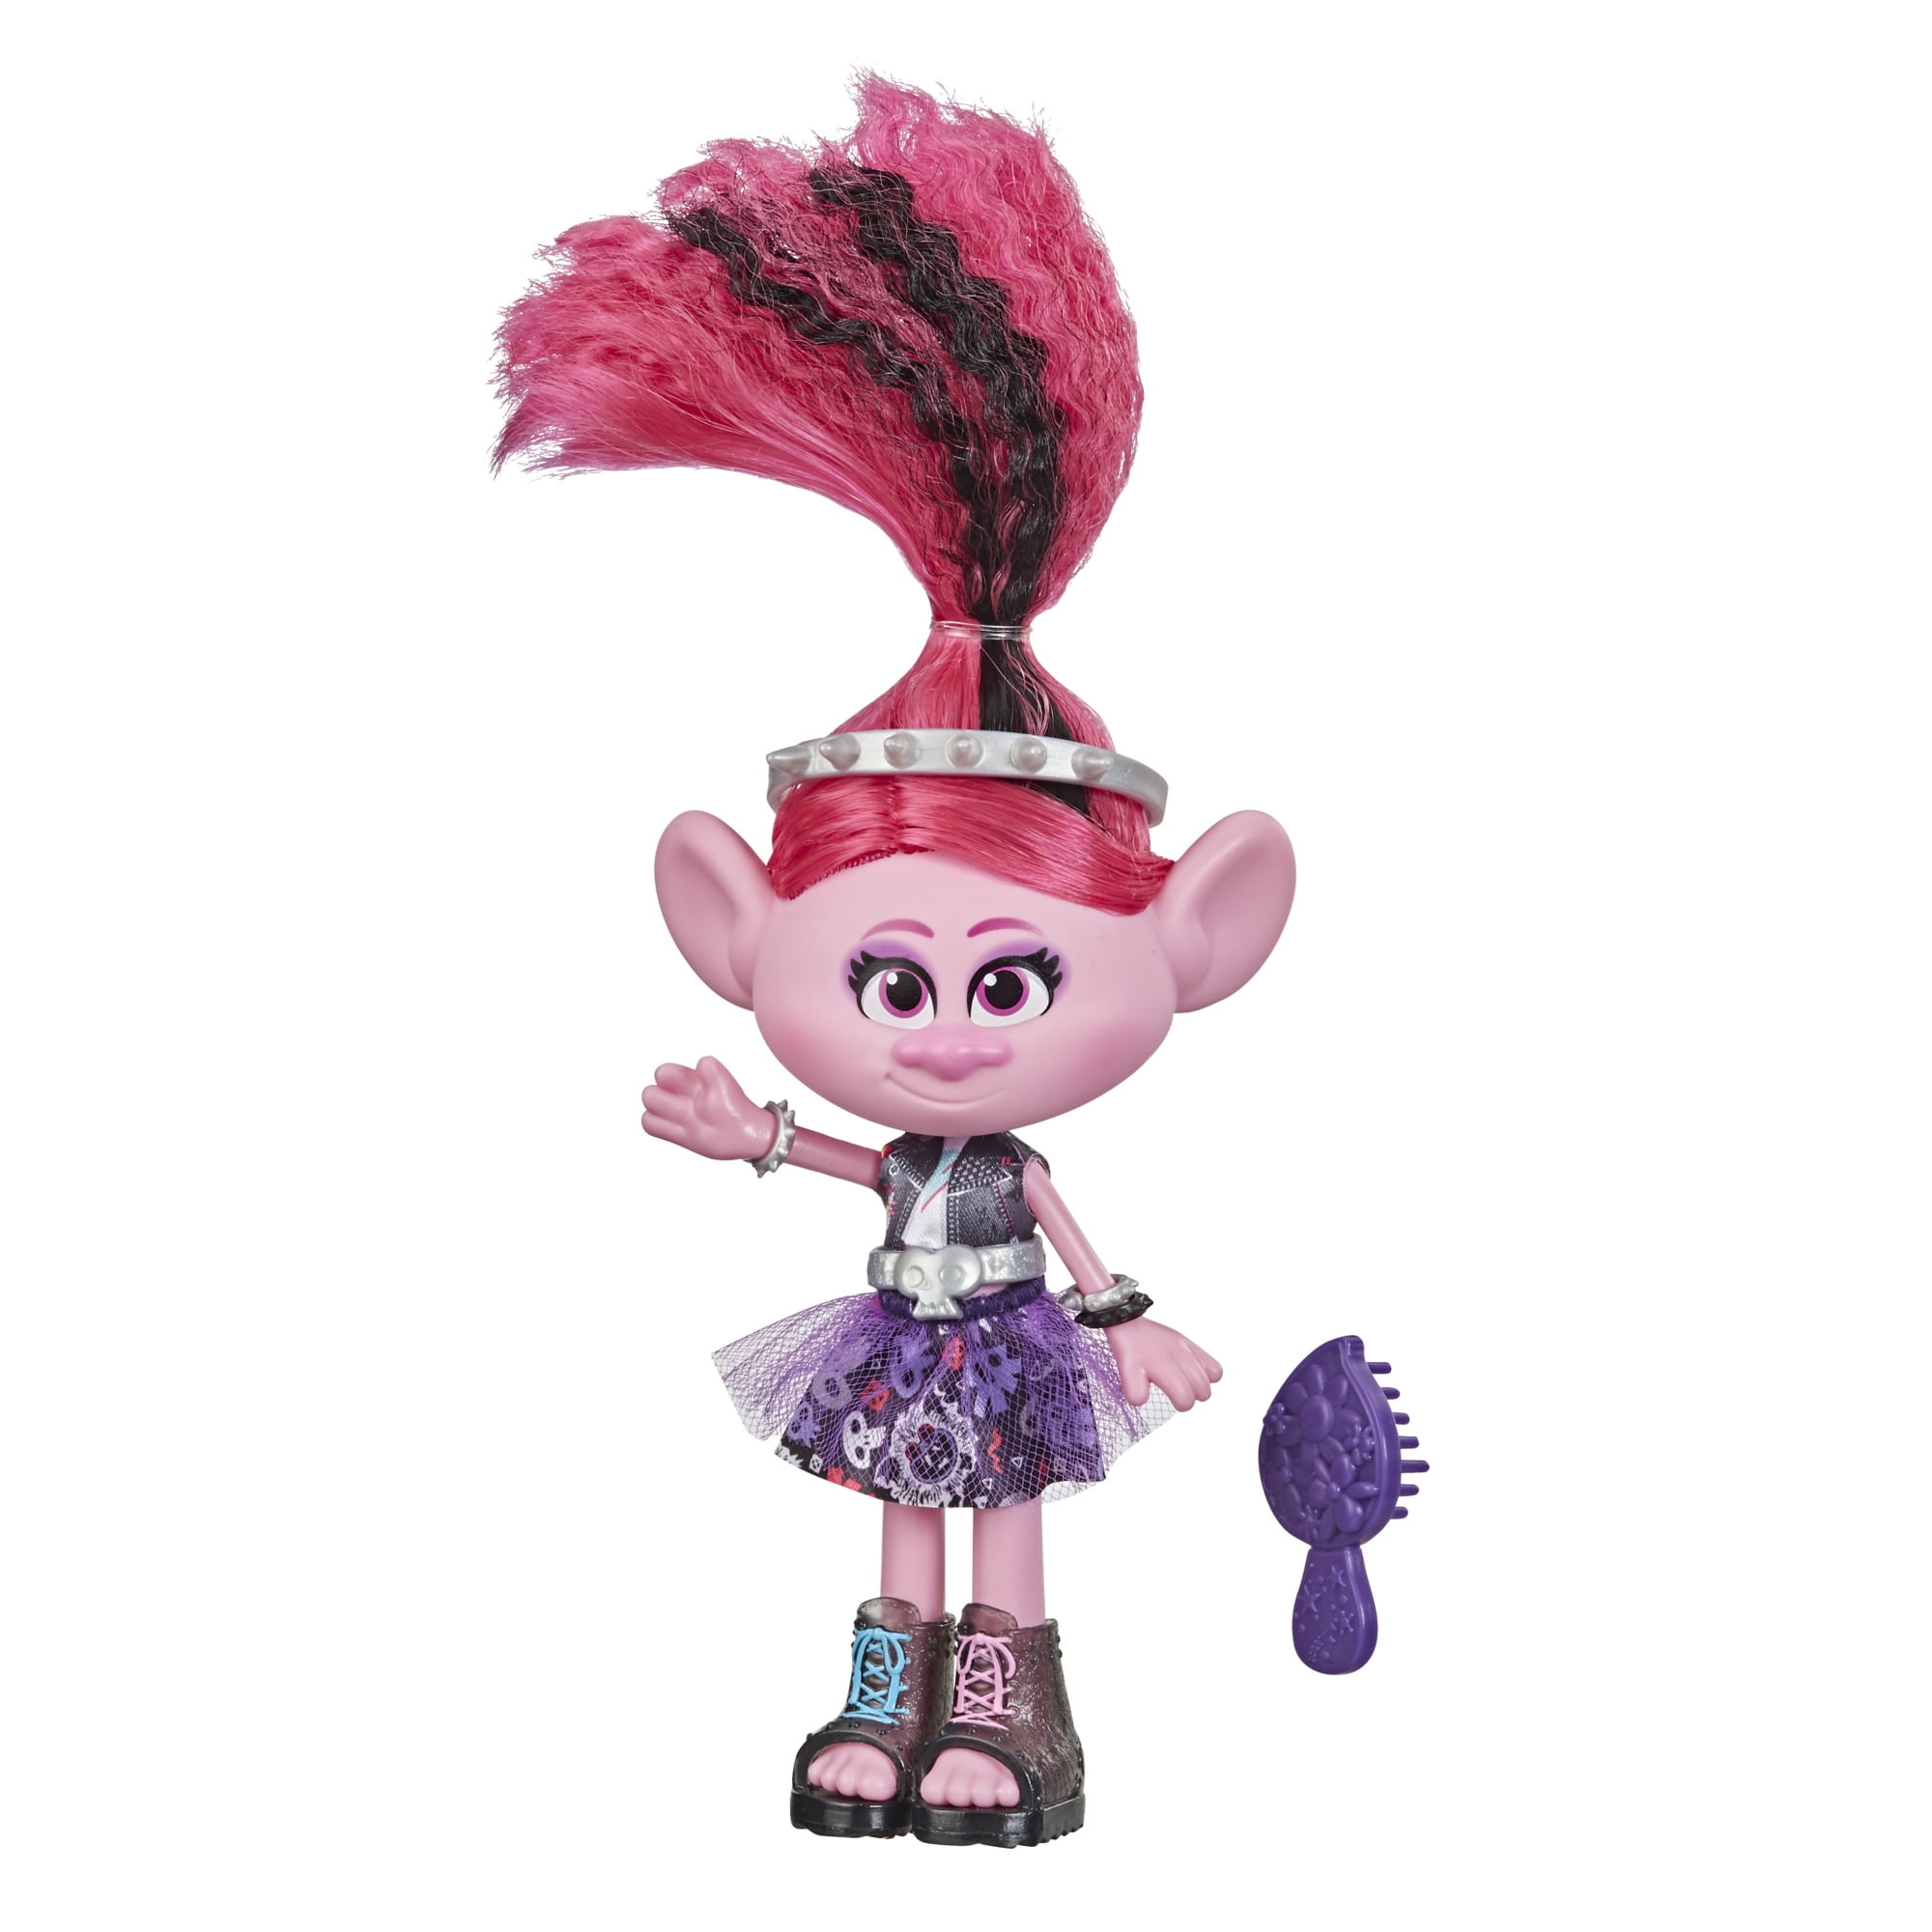 Character Poppy and Twins Fashion Outfits Dress-Up Kids New Trolls Figure Toys 